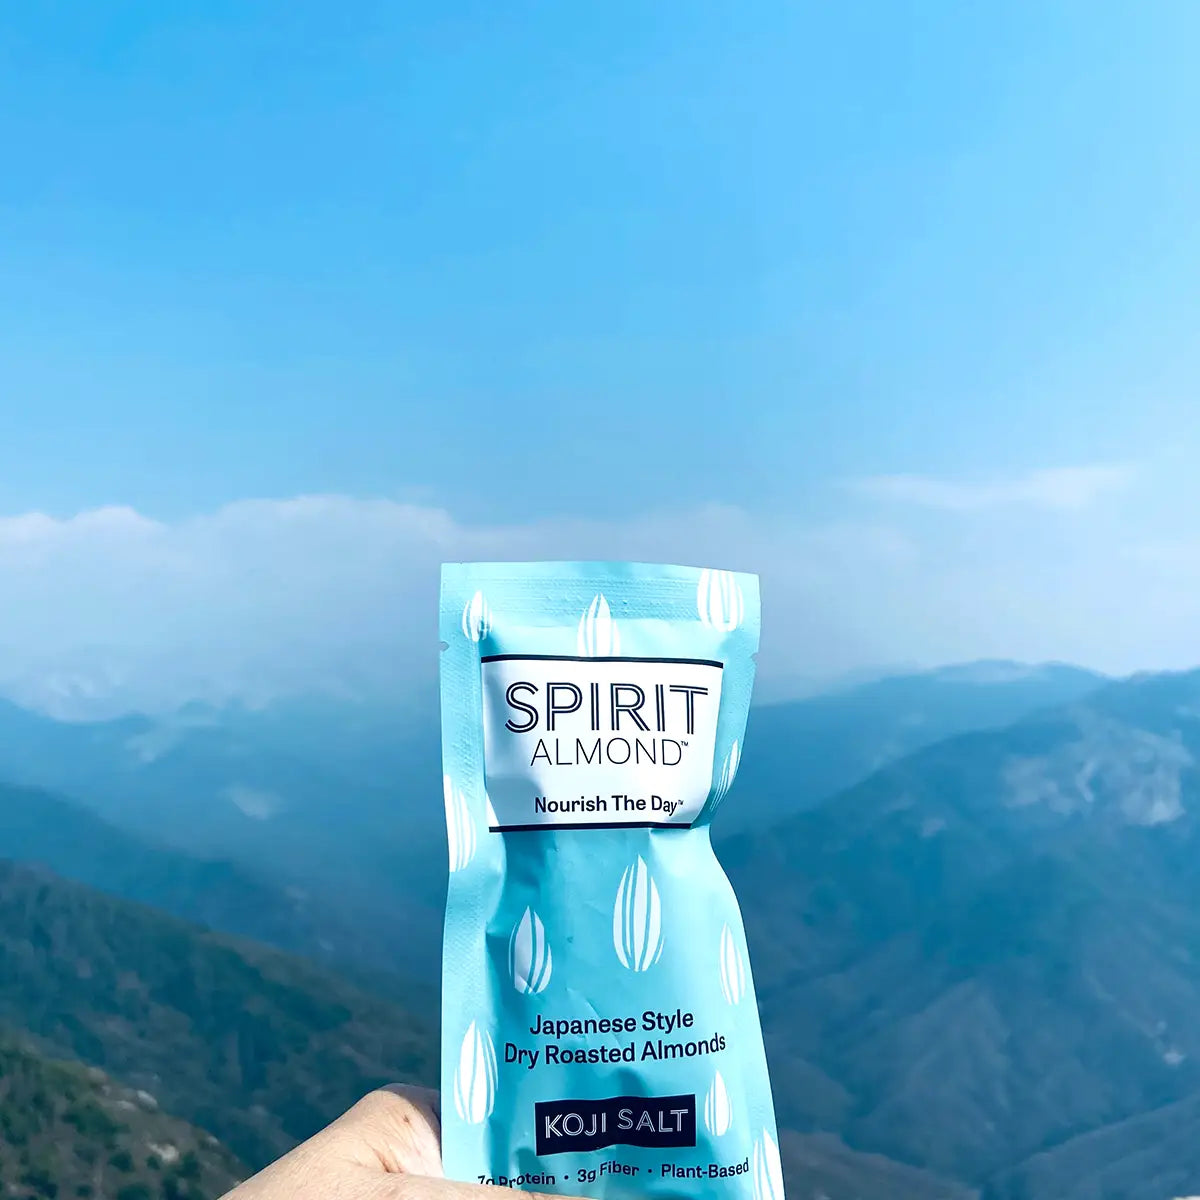 SPIRIT Almond Package Koji Salt Flavor held up against background of sky and mountains